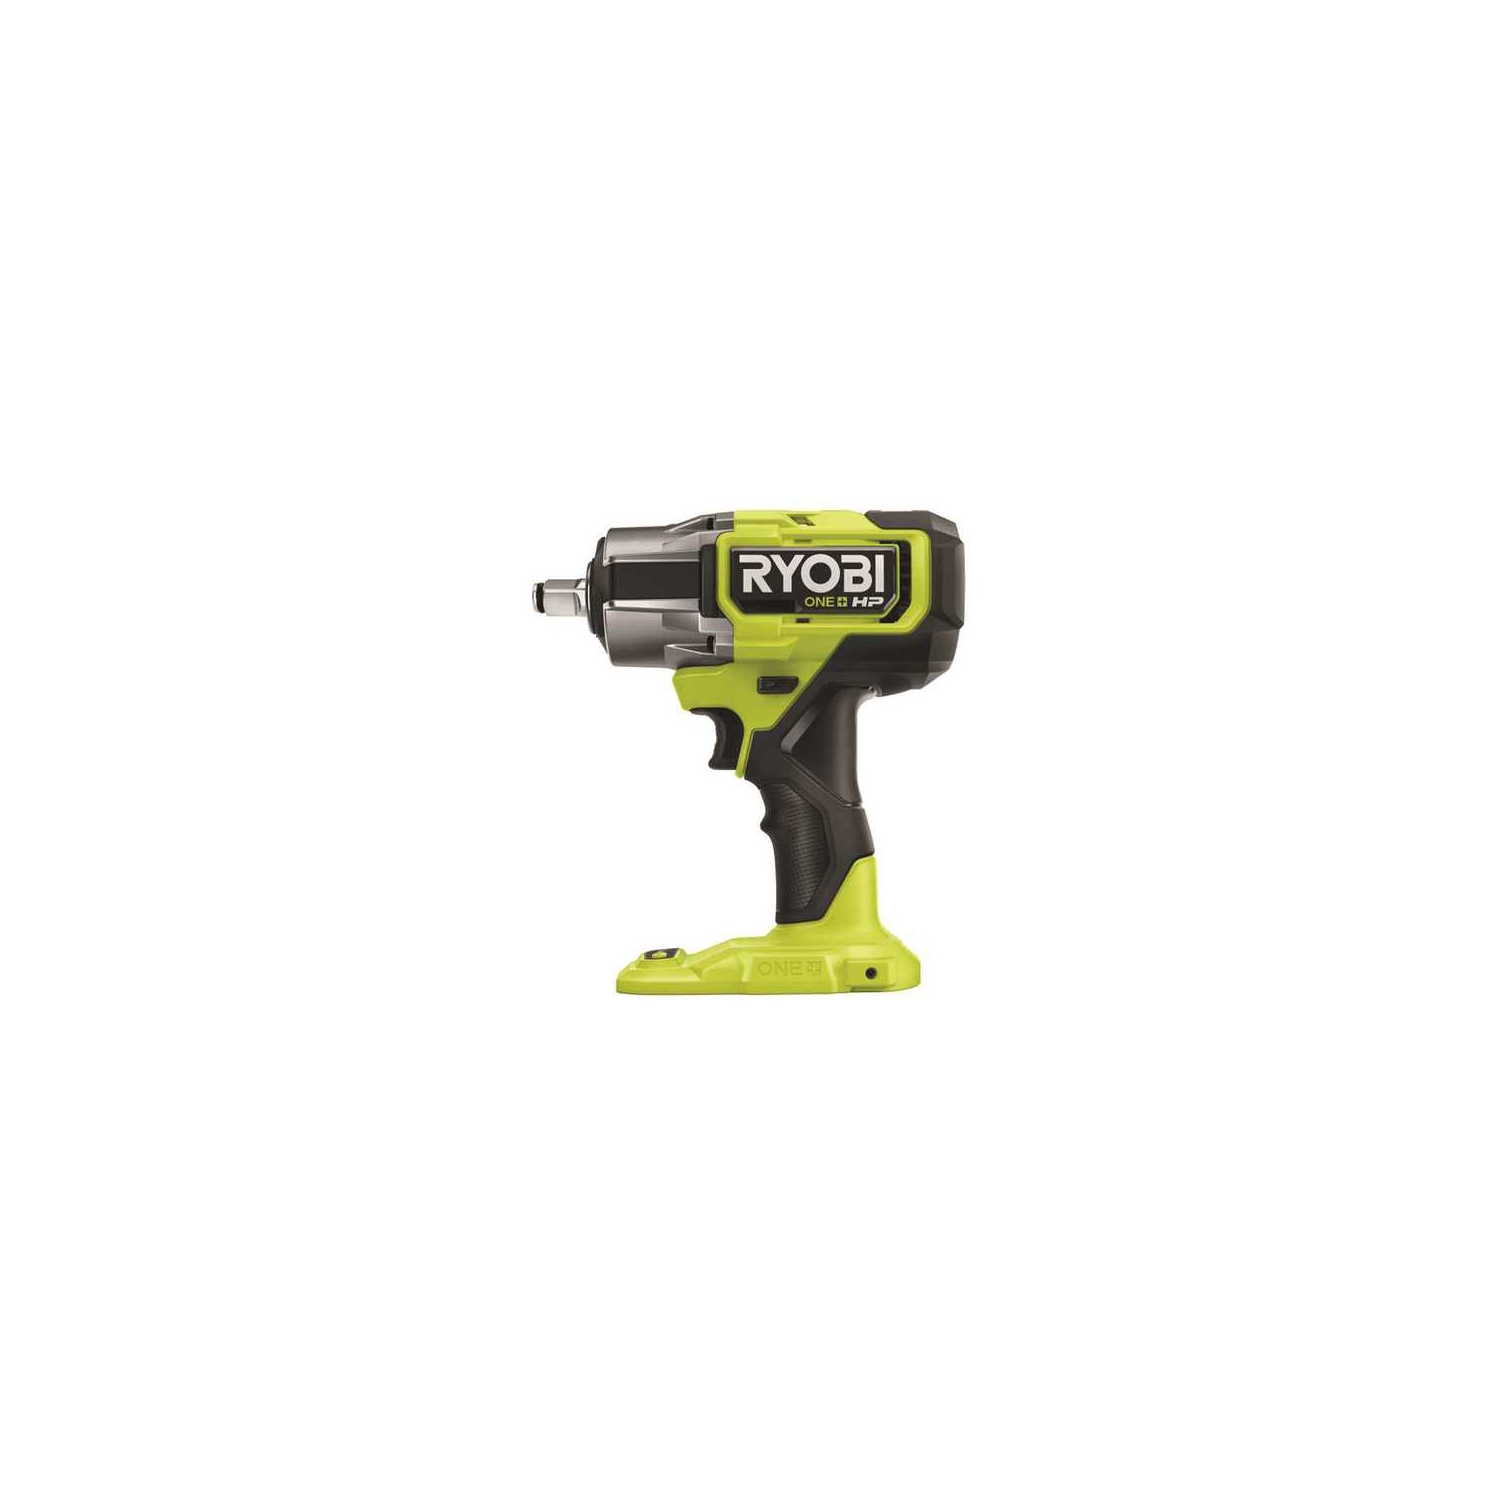 RYOBI P262 ONE+ HP 18V Brushless Cordless 4-Mode 1/2 in. Impact Wrench (Tool Only) - Brand New